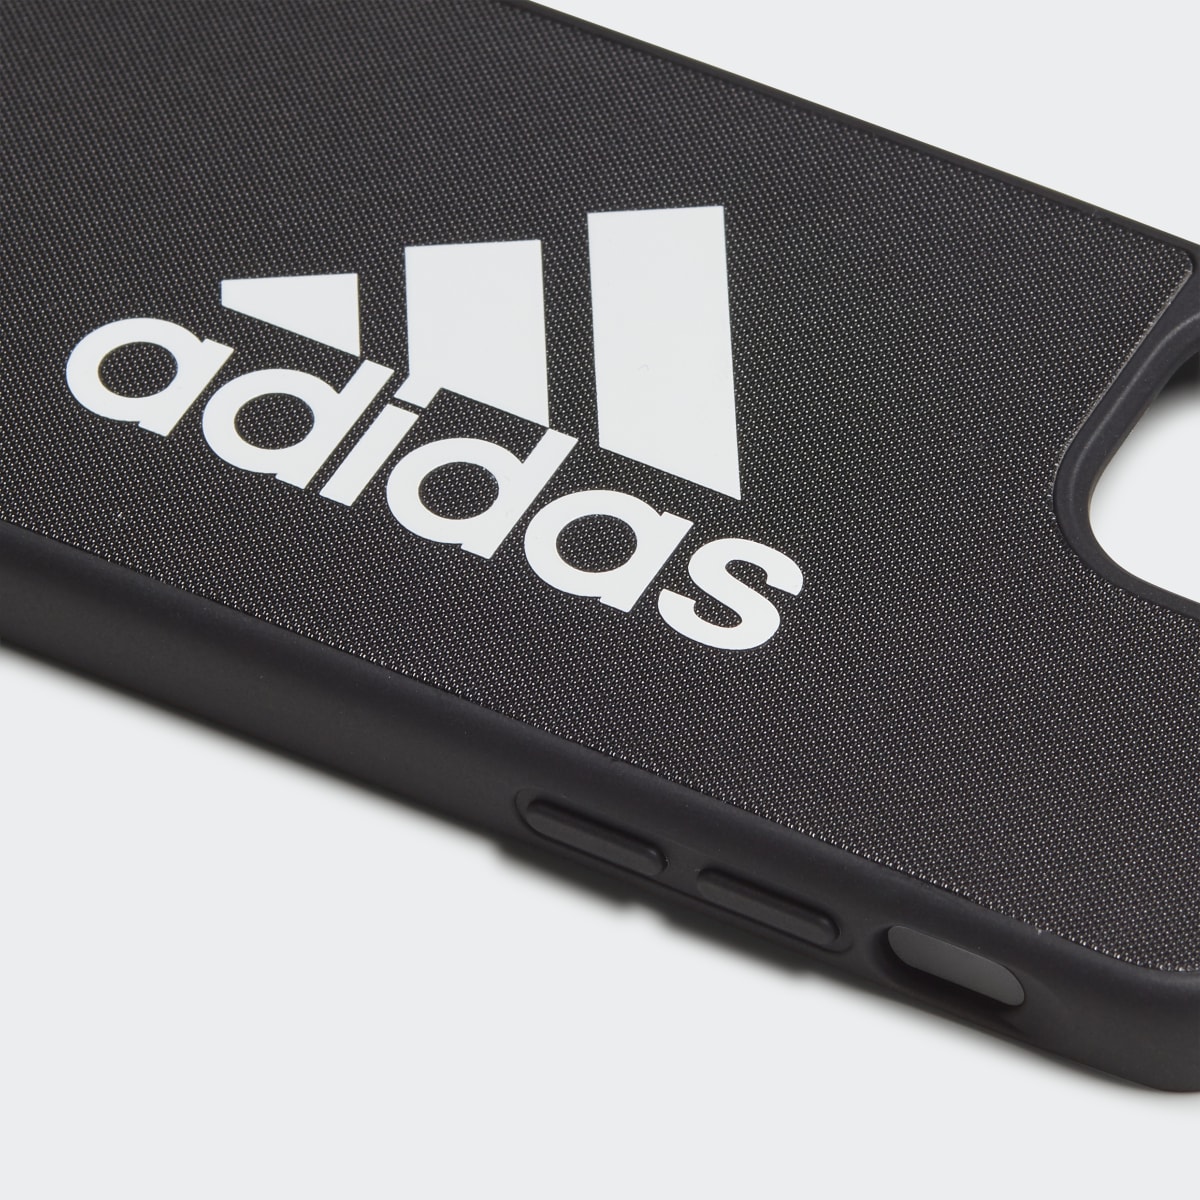 Adidas Iconic Sports for iPhone 12 mini. 4